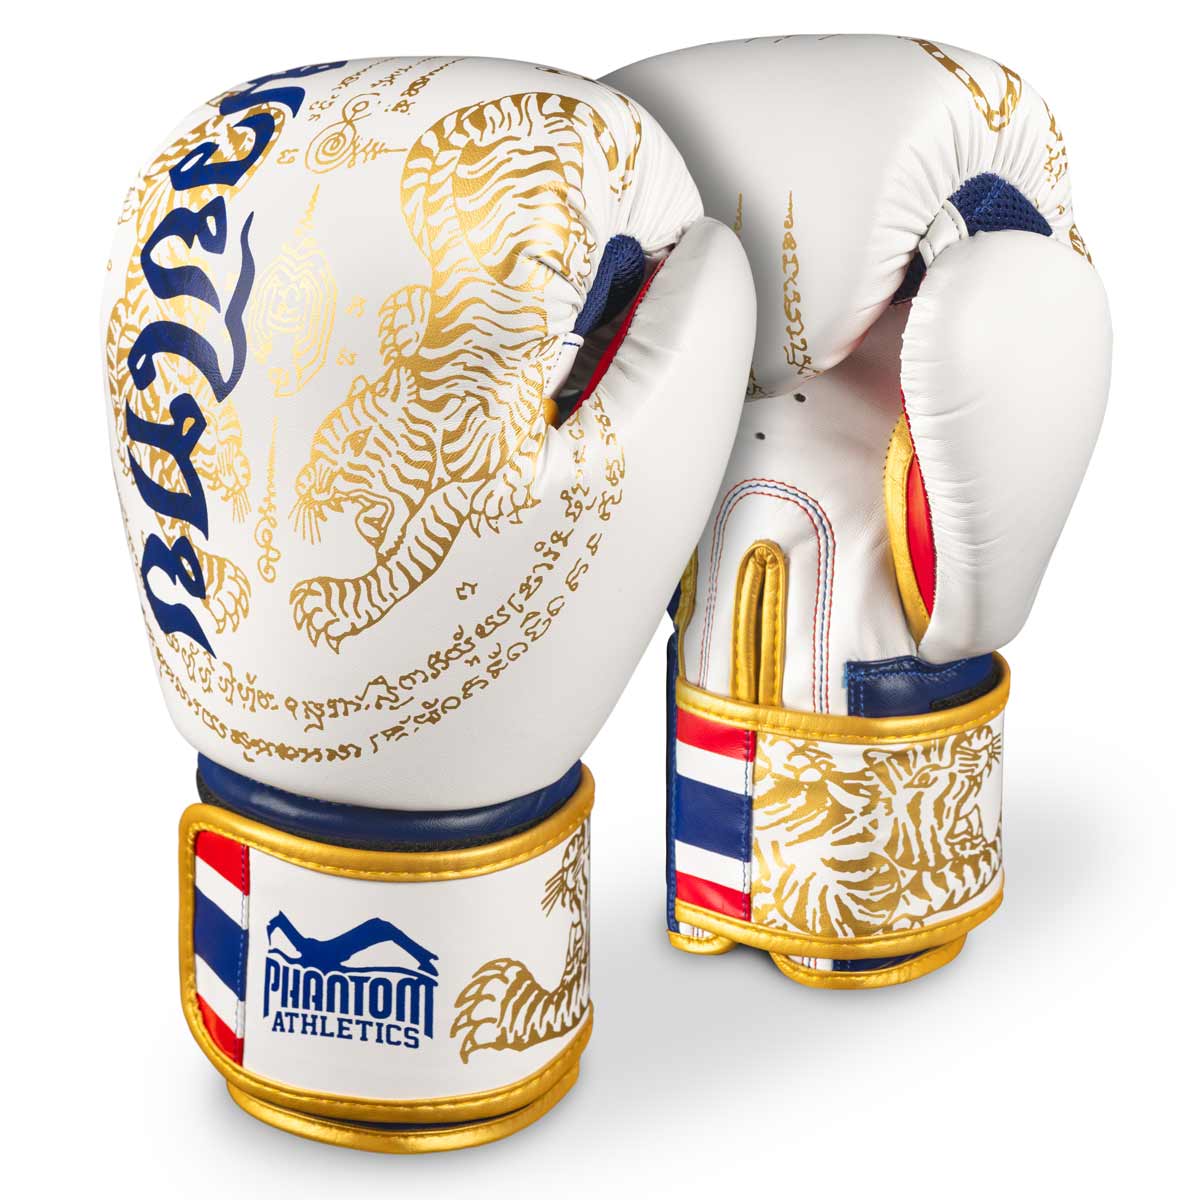 Phantom Muay Thai boxing gloves with Thai print in the limited edition white/gold/blue/red.